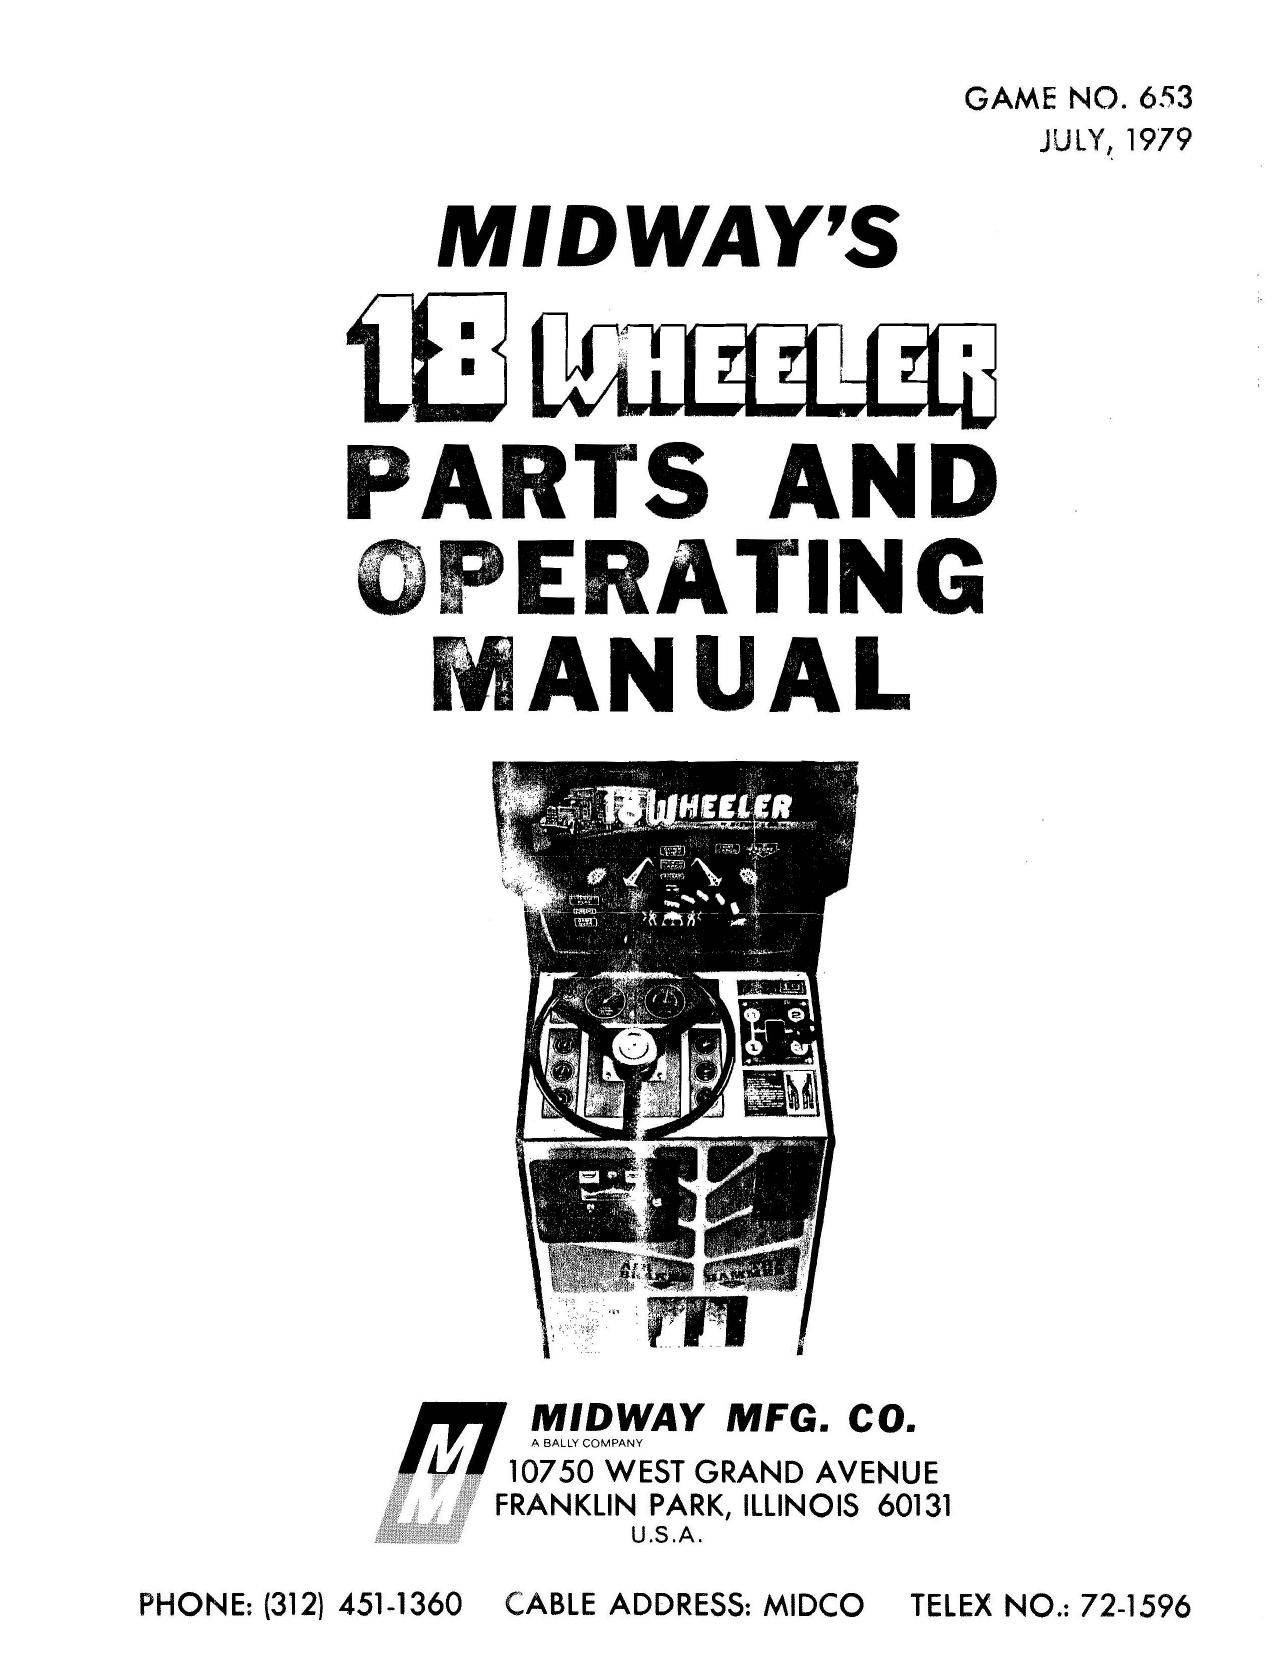 18 Wheeler Parts and Operating Manual (missing pages)